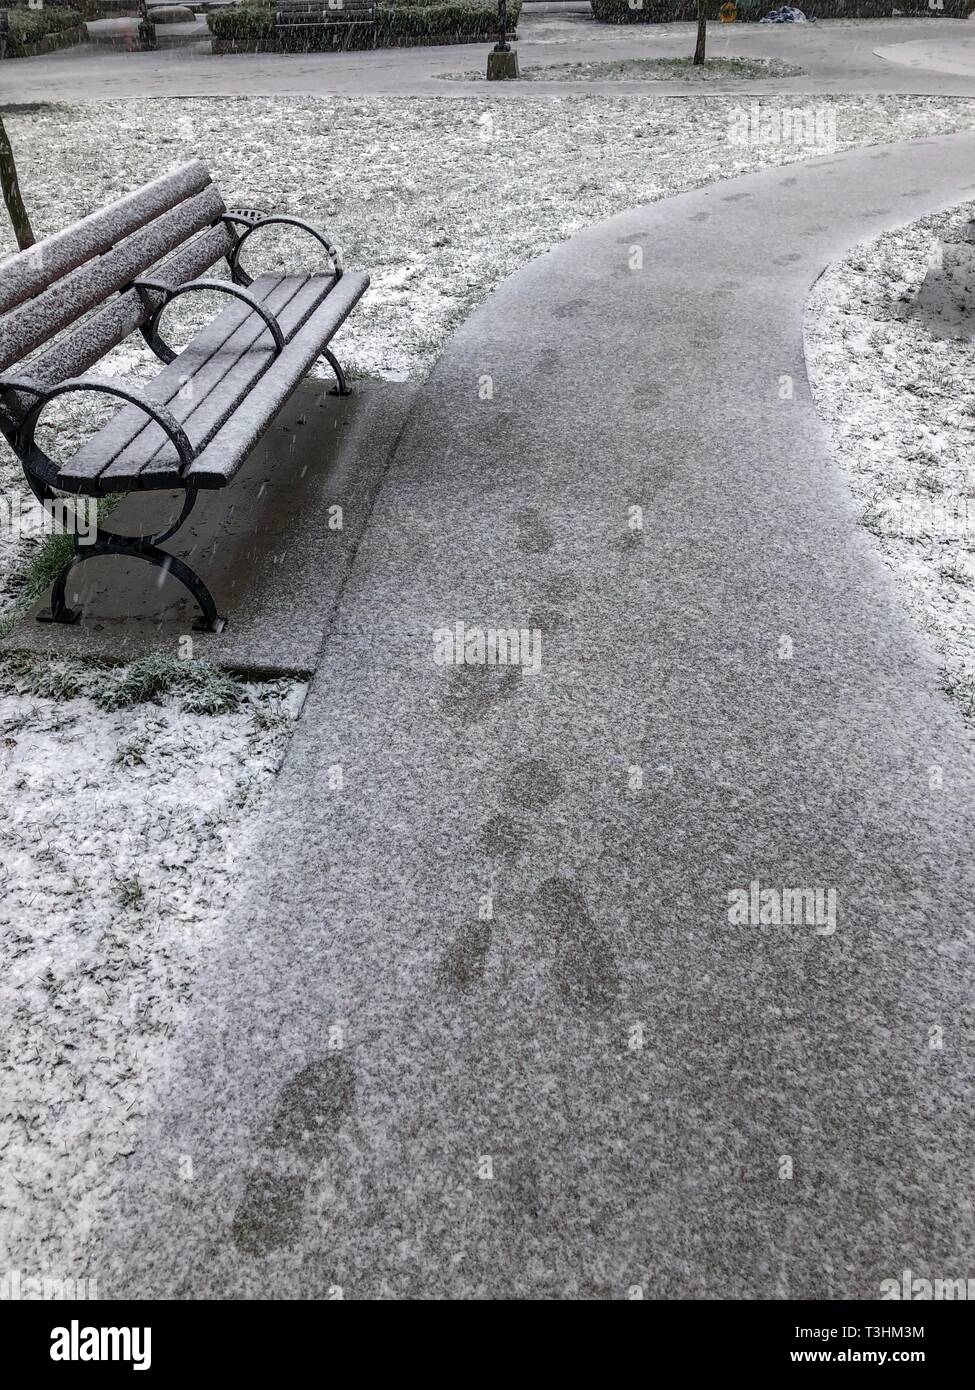 Bench and footsteps in mild snow Stock Photo